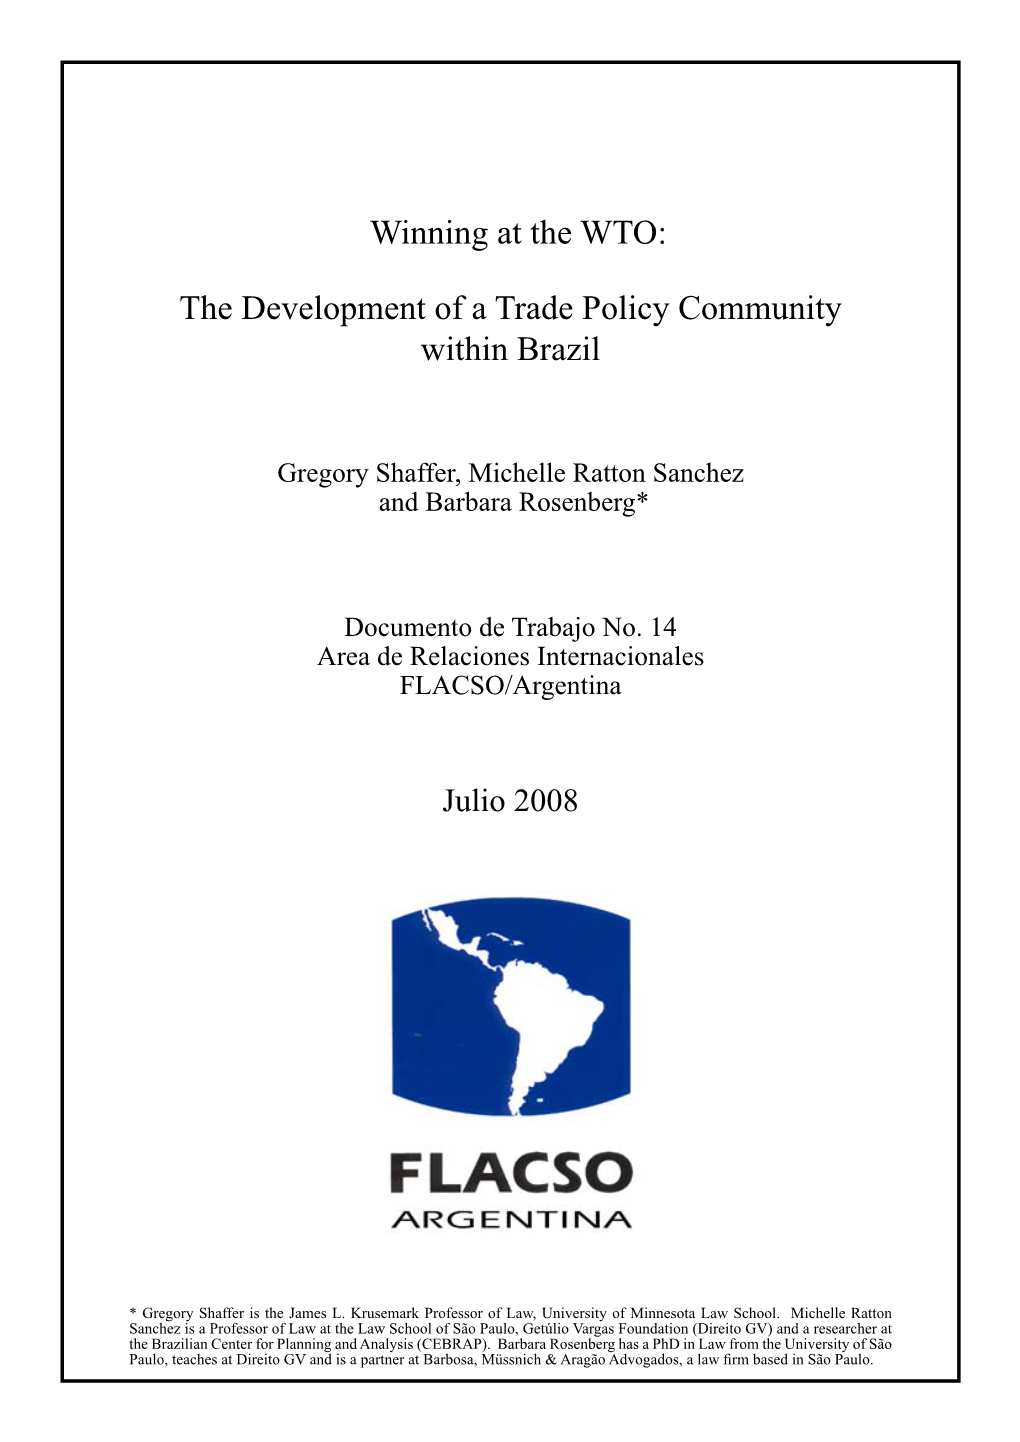 Winning at the WTO: the Development of a Trade Policy Community Within Brazil